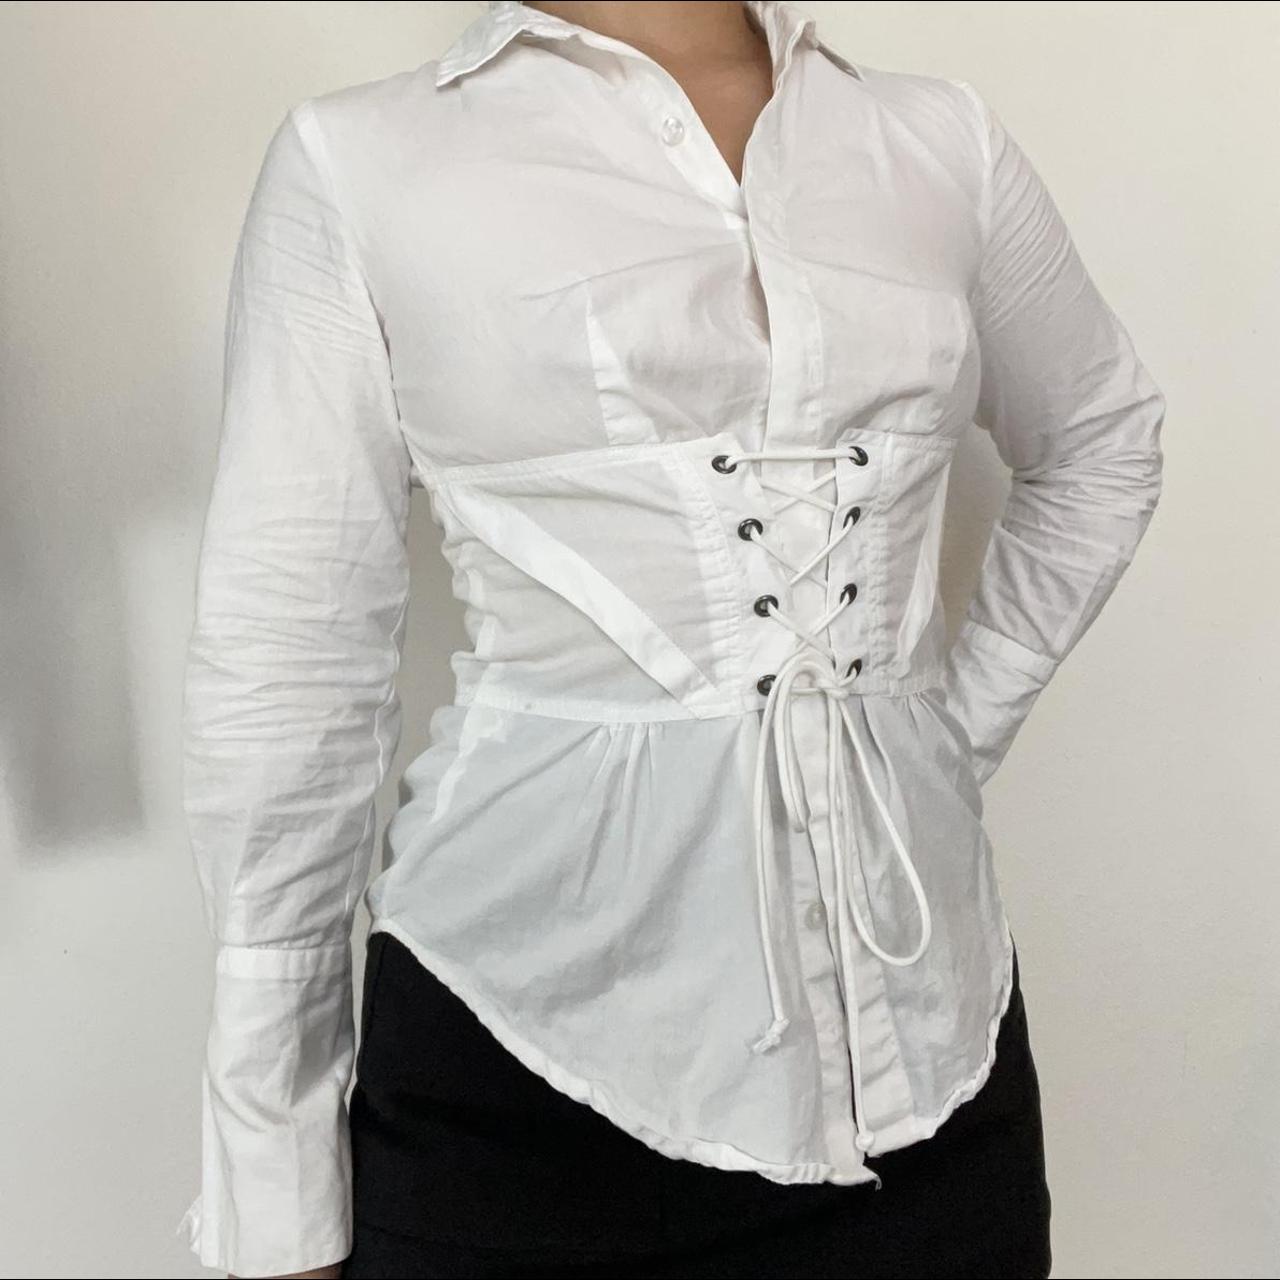 Product Image 1 - Corset Button Up Top
Corset style